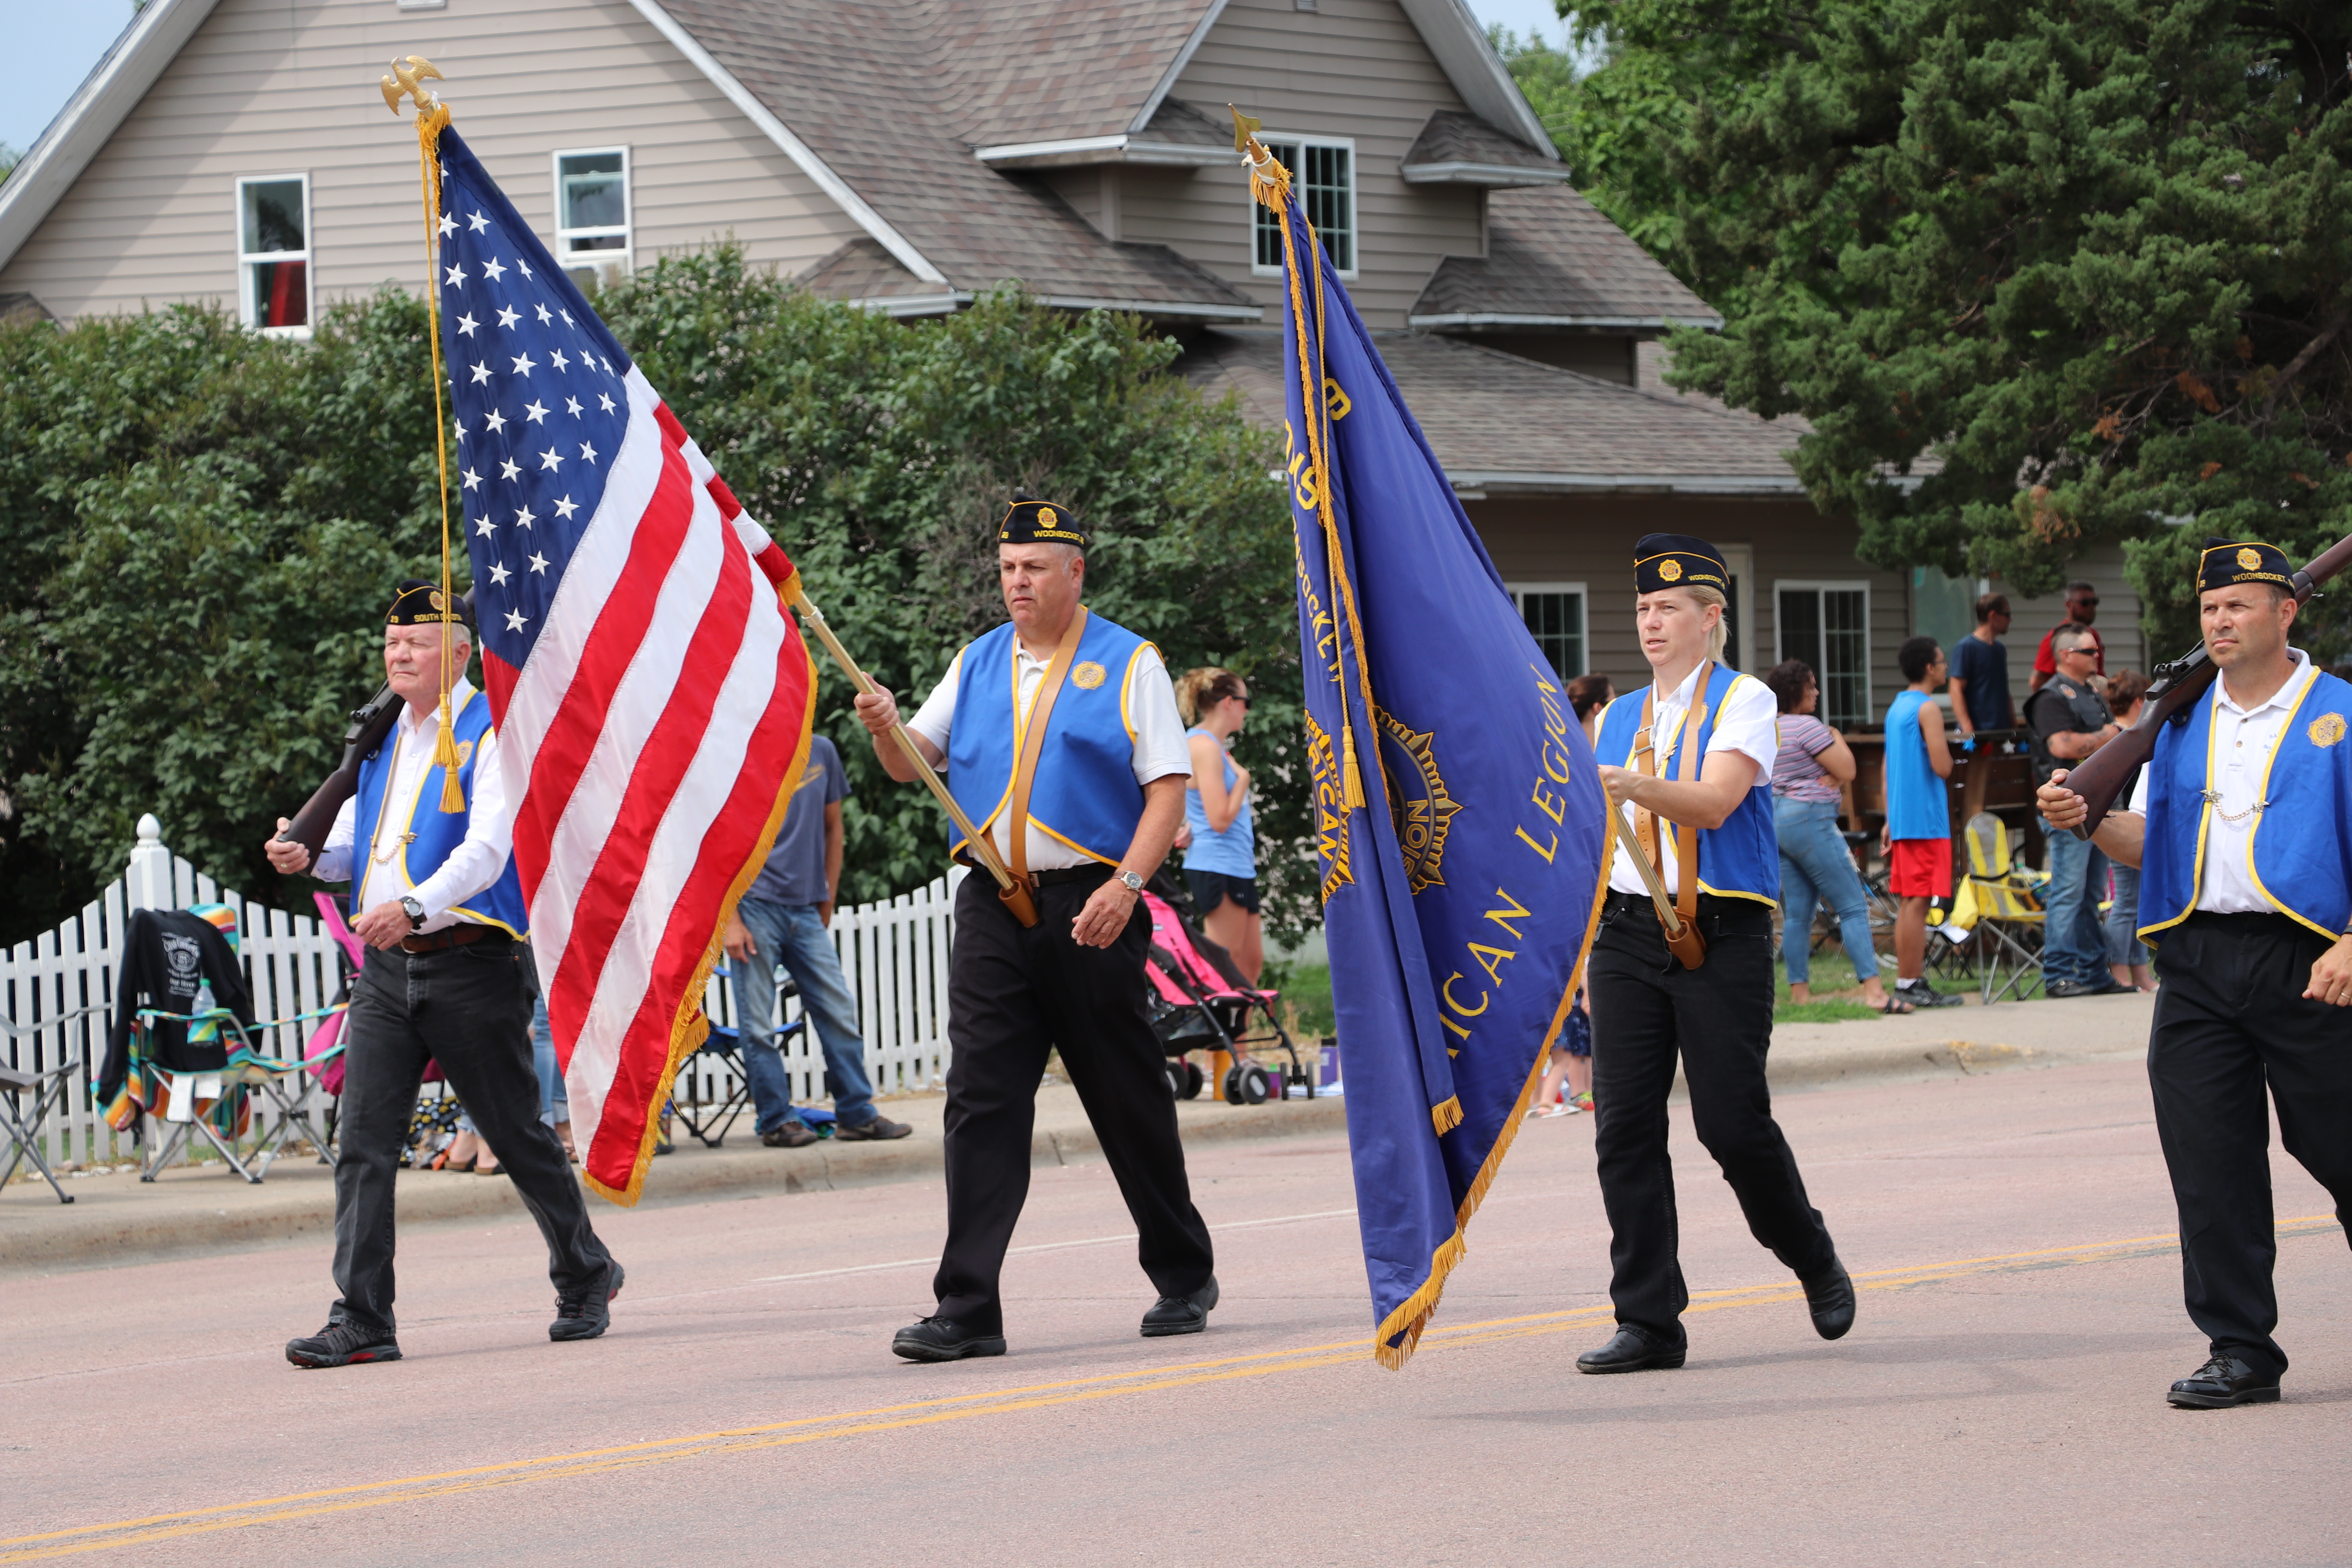 The annual Woonsocket Water Festival includes a parade led by the American Legion Post #29 Color Guard.